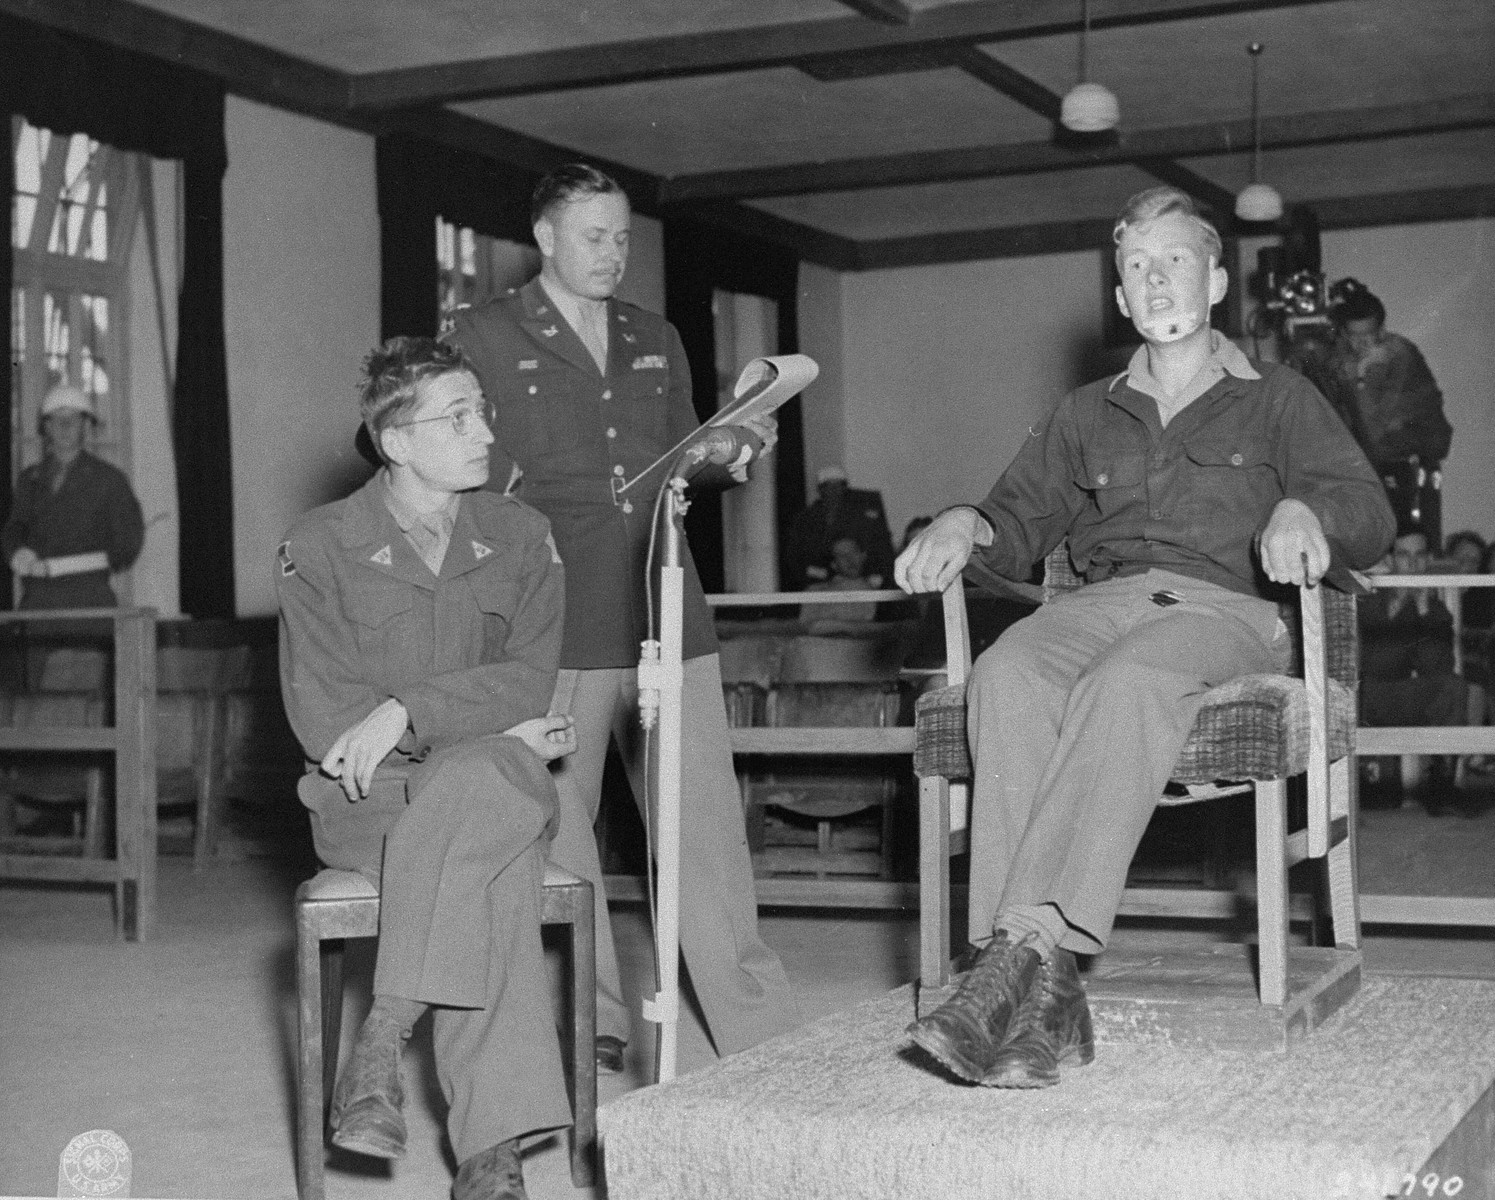 Former SS 2nd Lieutenant Kurt Kramm testifies at the trial of 74 former SS men charged with perpetrating the Malmedy atrocity. 

Pictured from left to right are: Herbert Rosenstock, an interpreter; Lt. Col. Burton F. Ellis; and Kramm.